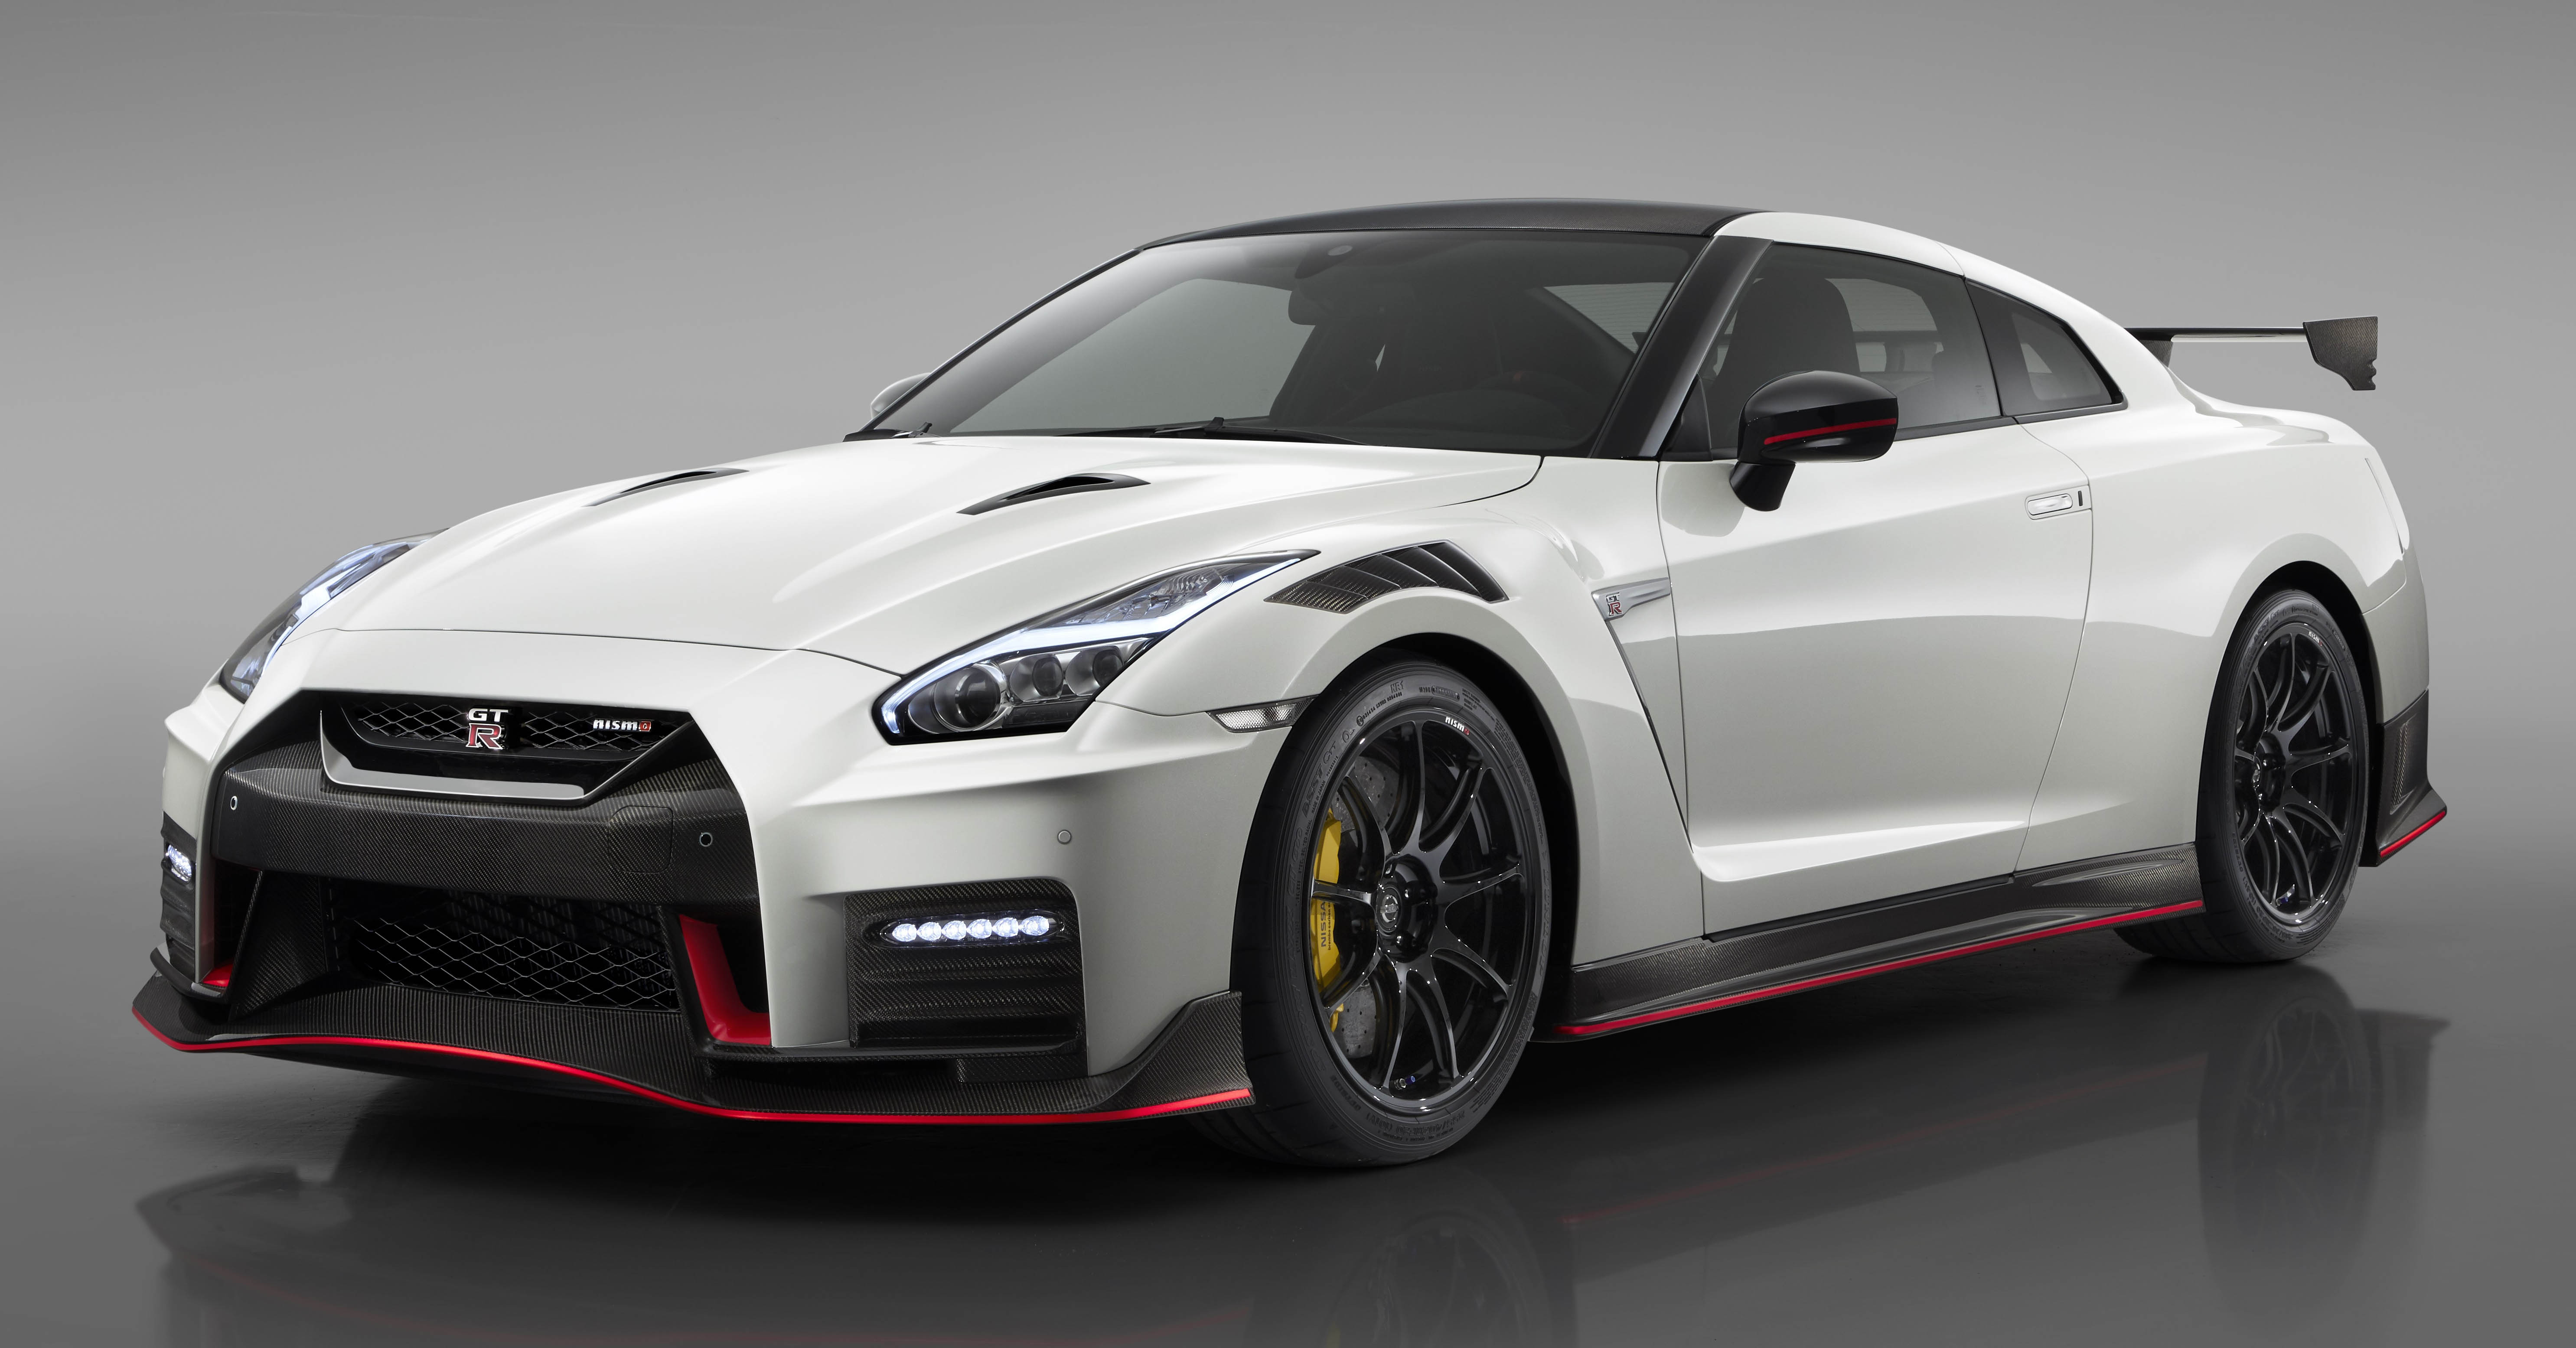 Report: Nissan Exec Confirms R36 Replacement For GT-R